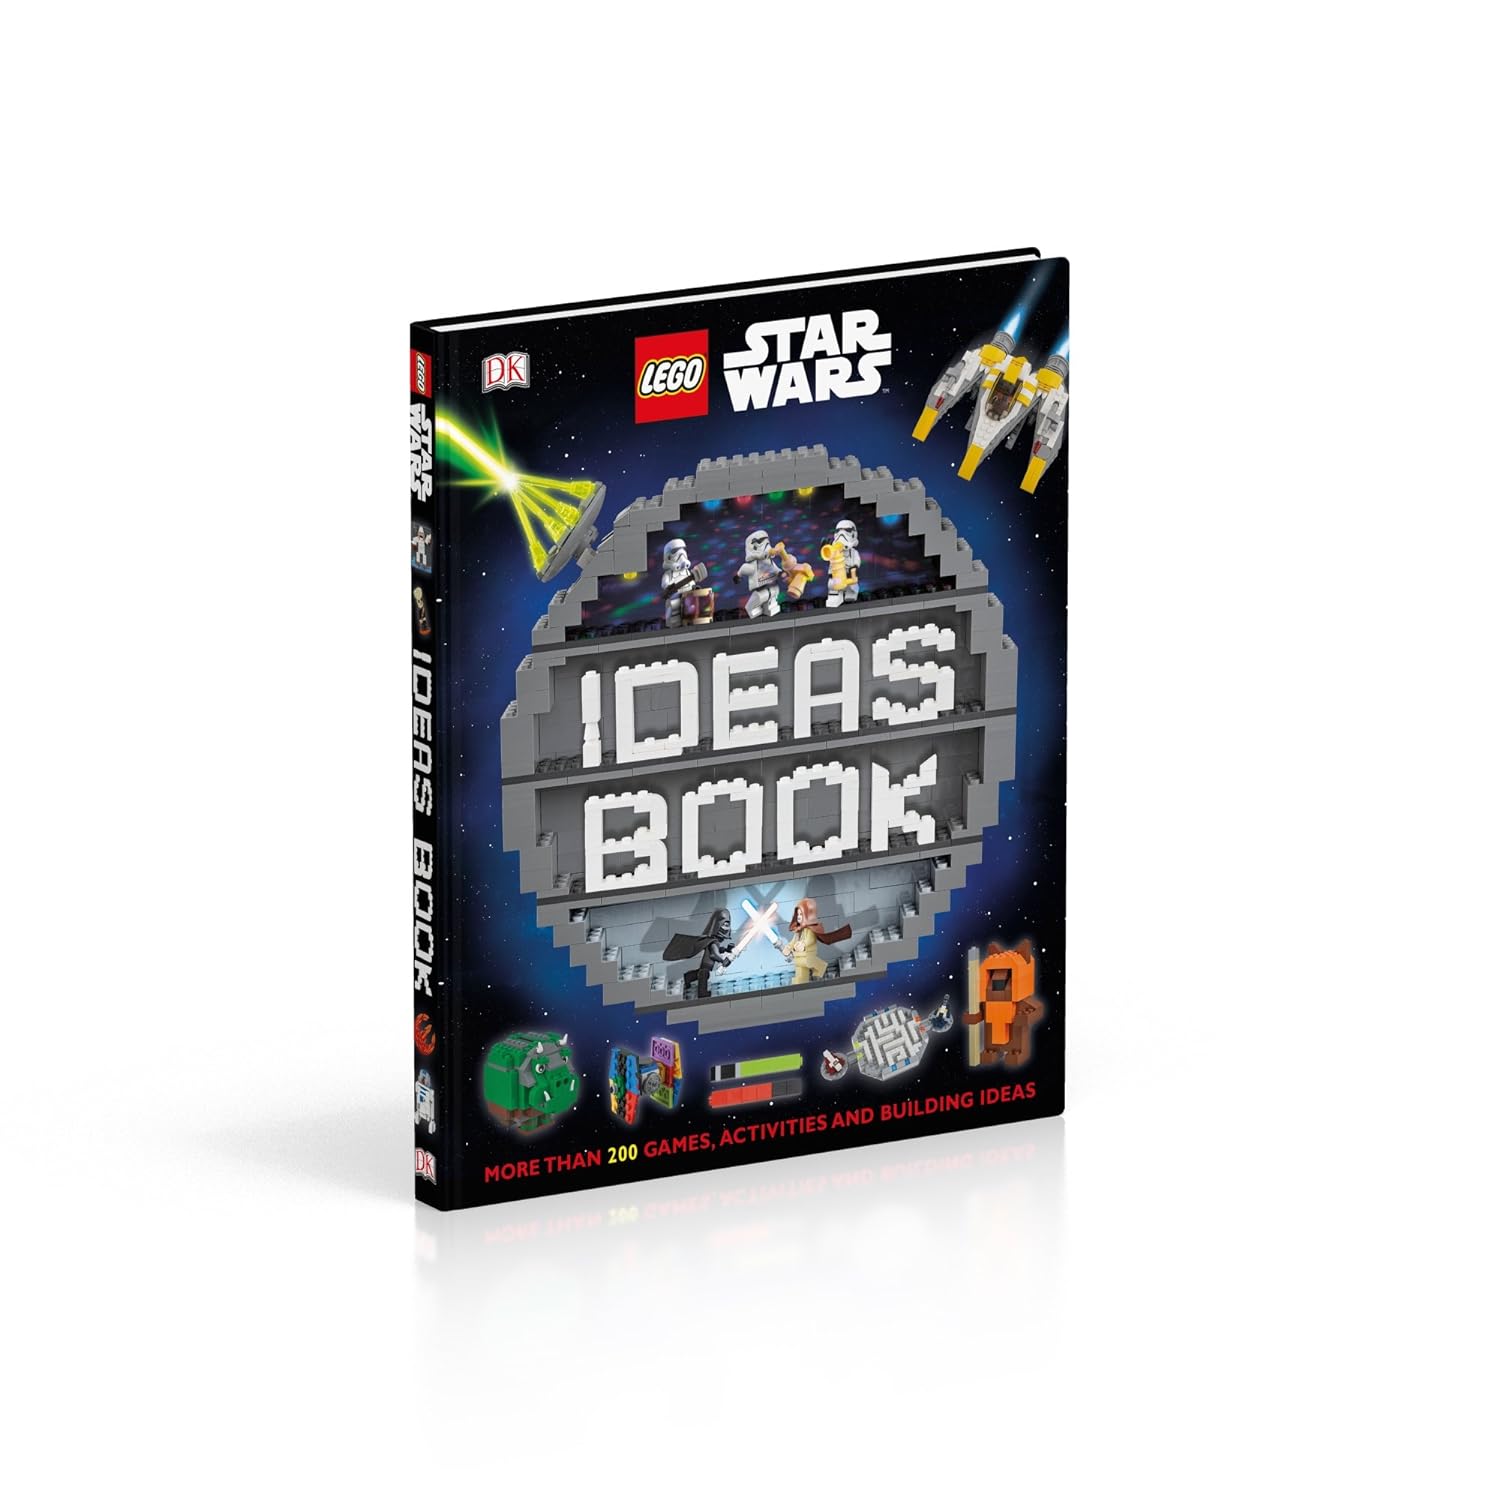 Book　–　Ideas　Buildi　Mart　Activities,　More　Wars　Games,　200　than　Book:　Star　LEGO　and